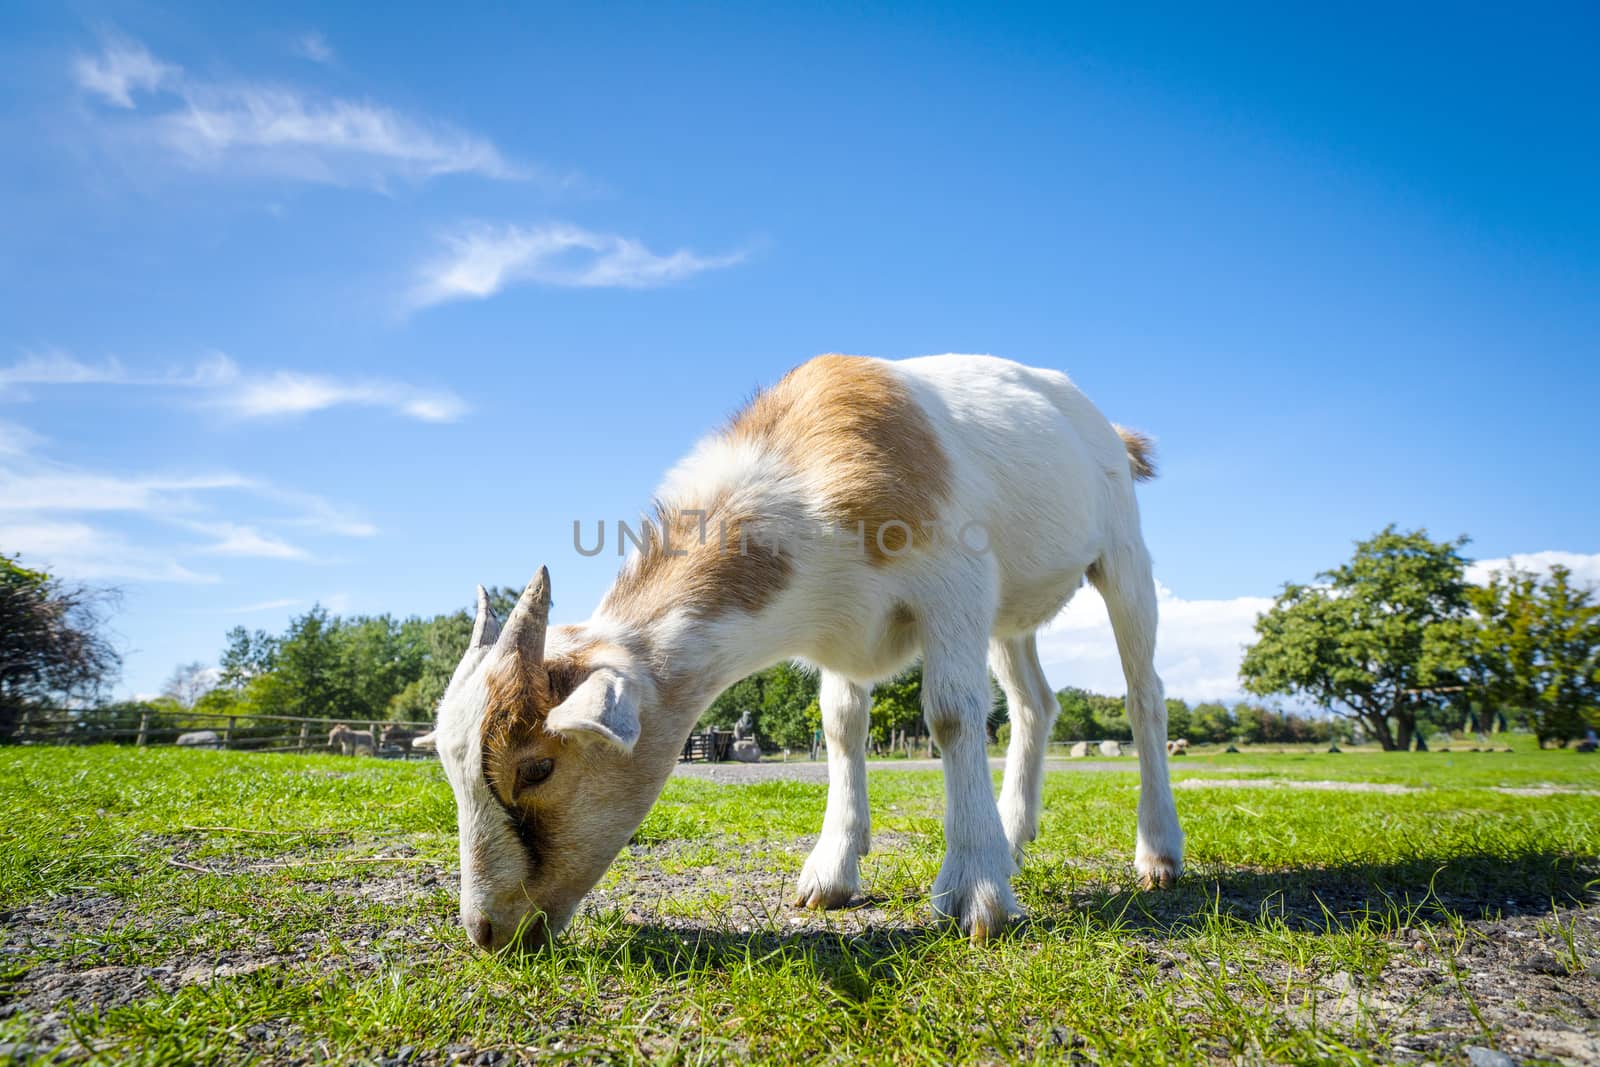 Goat eating fresh green grass at a farm in the spring under a blue sky